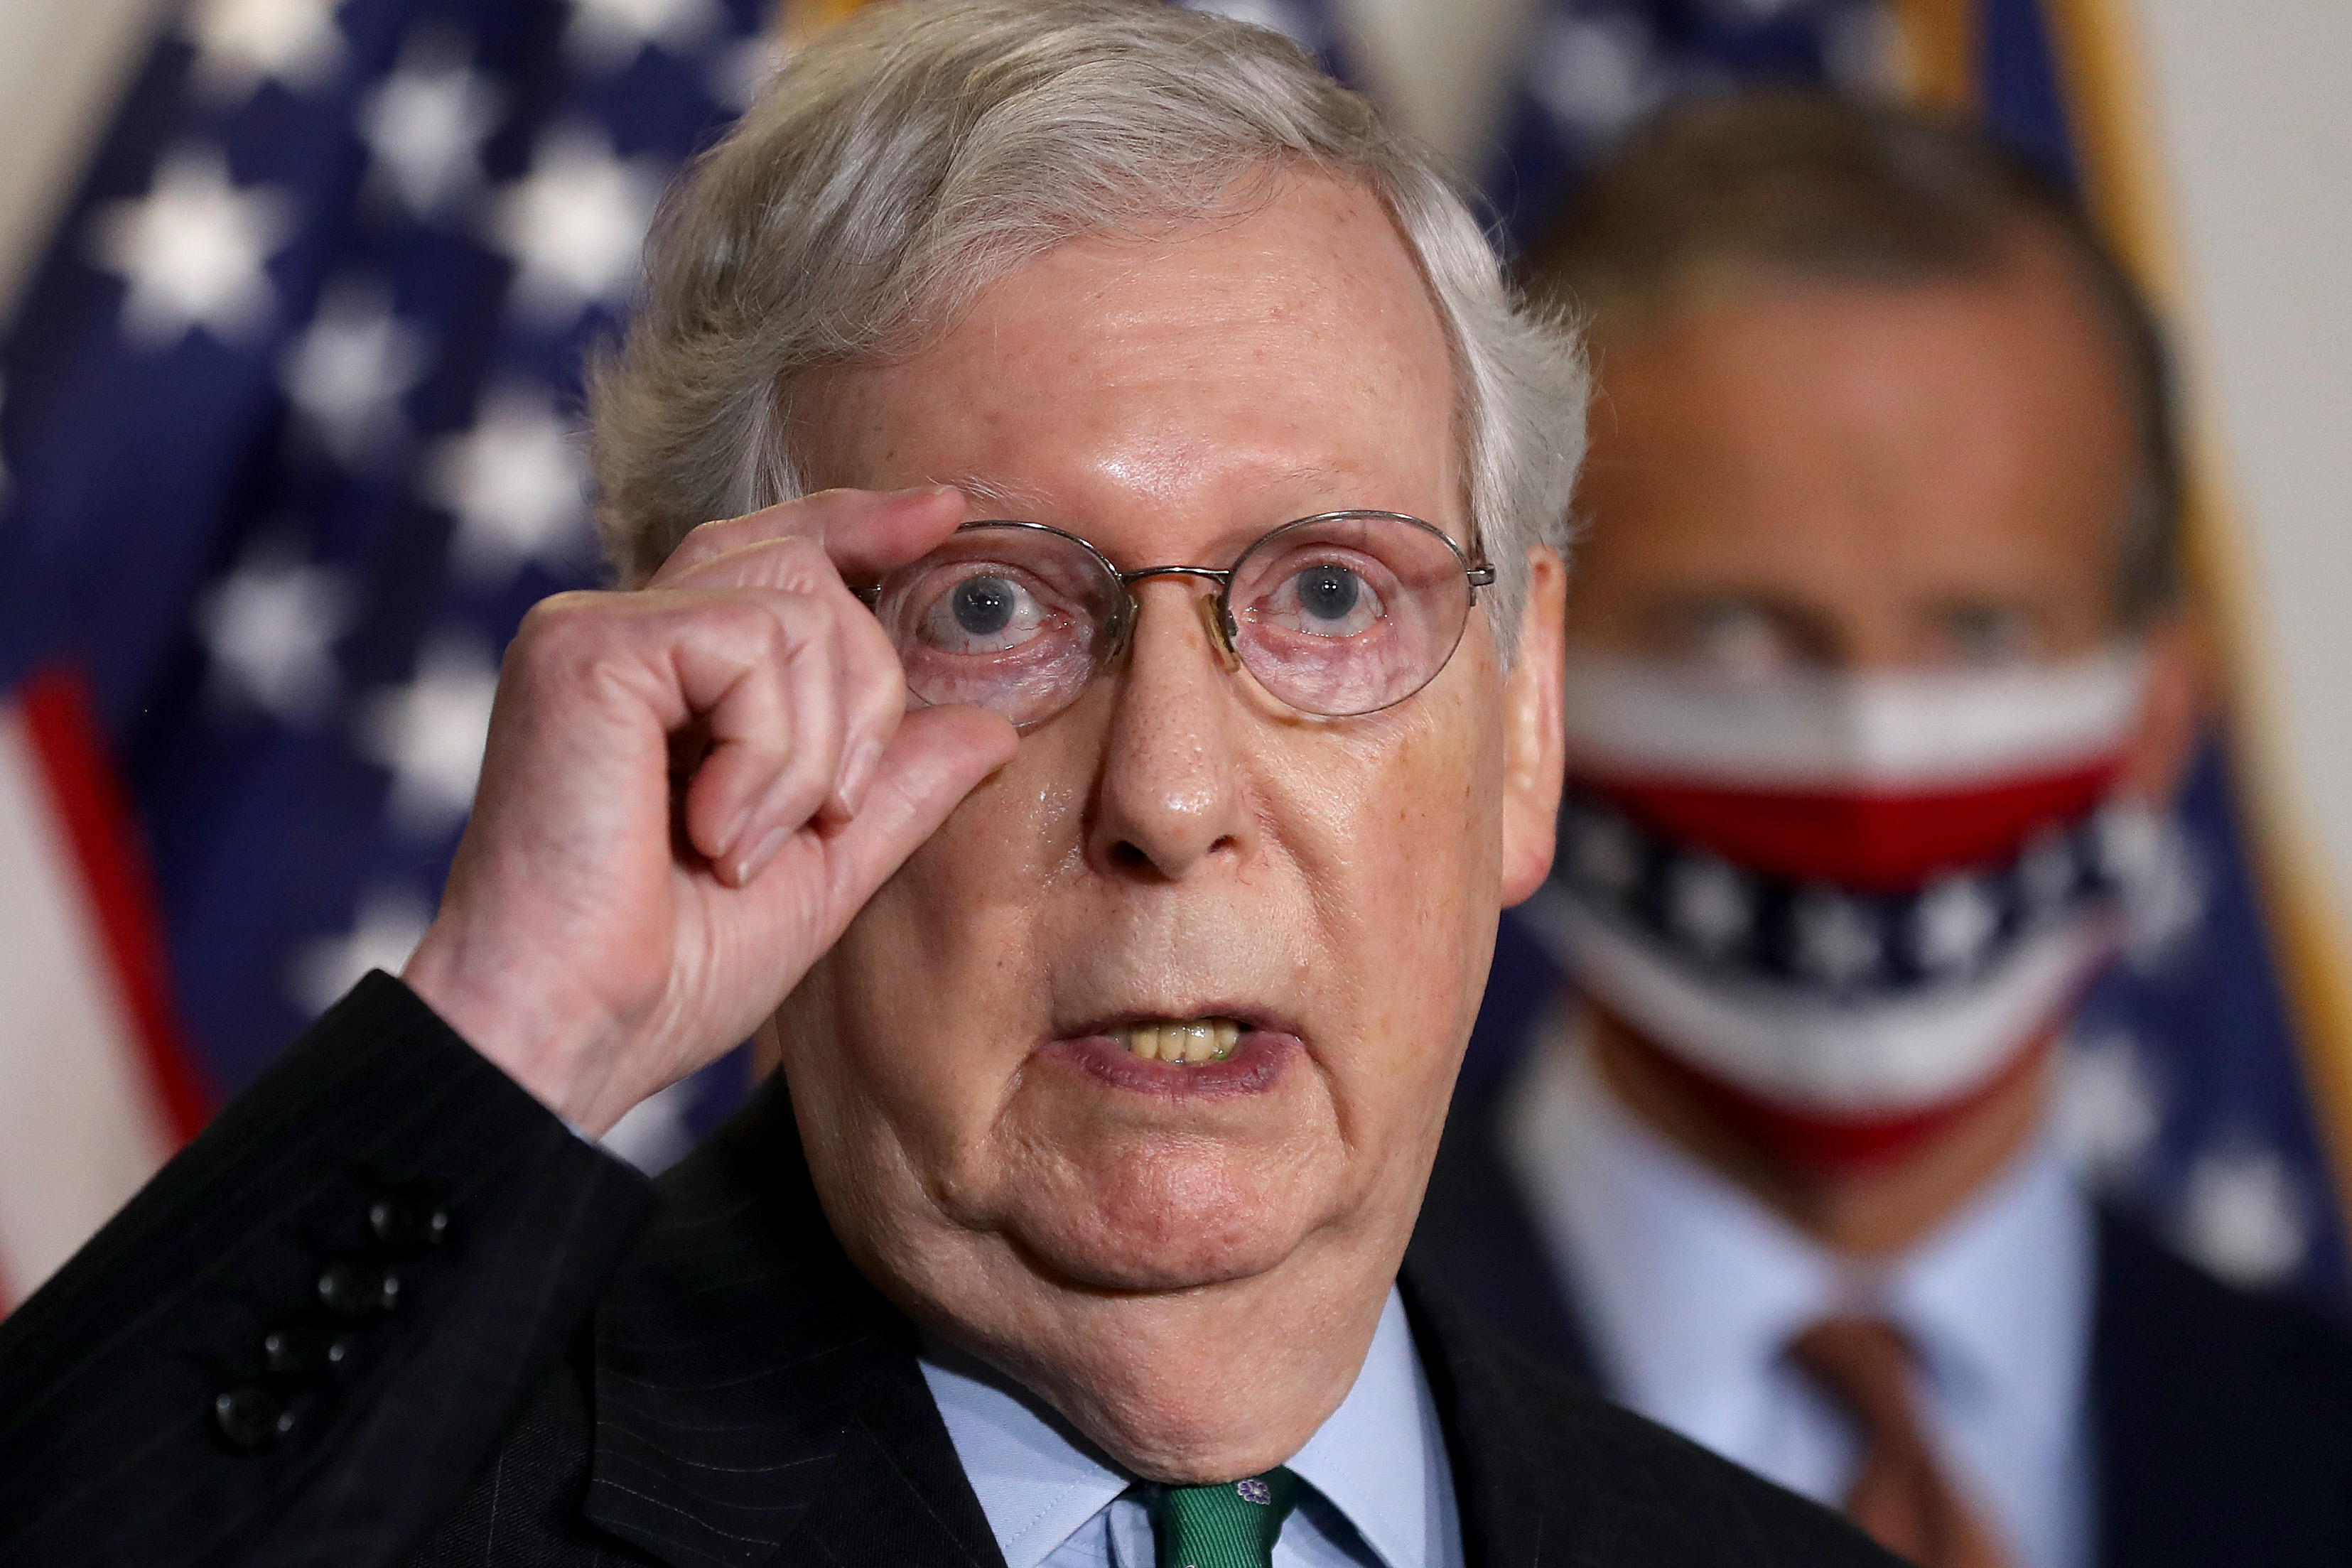 At MAGAland, Mitch McConnell, not Trump, is the hero of the stimulus battle